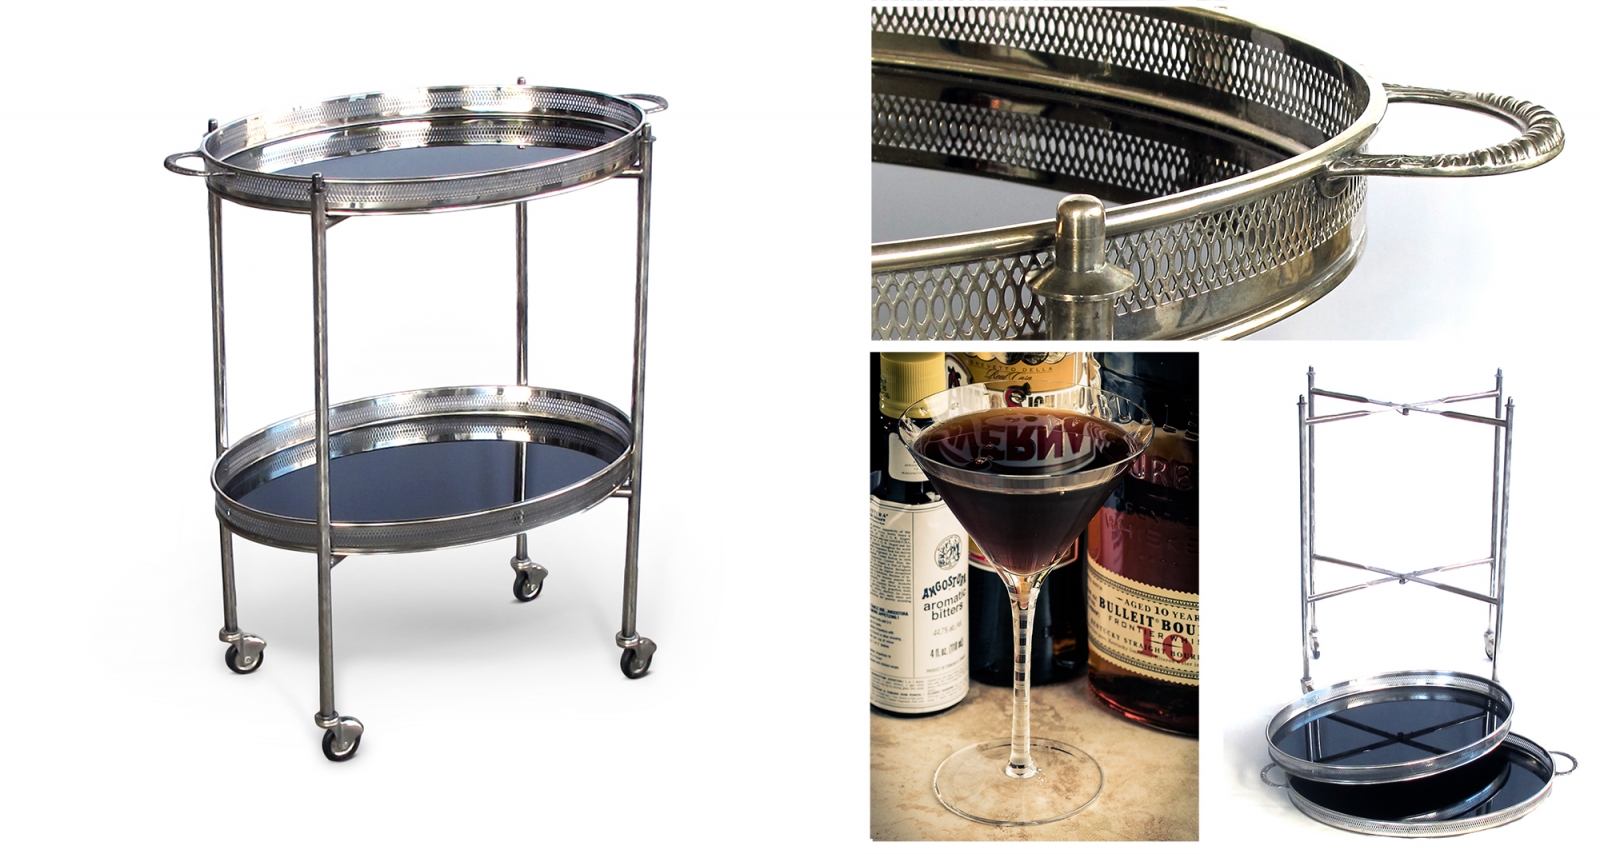 Classic & Chic Holiday Entertaining: Black Manhattans Served on a Nickel-Plated And Black Glass Oval Vintage Drinks Cart.